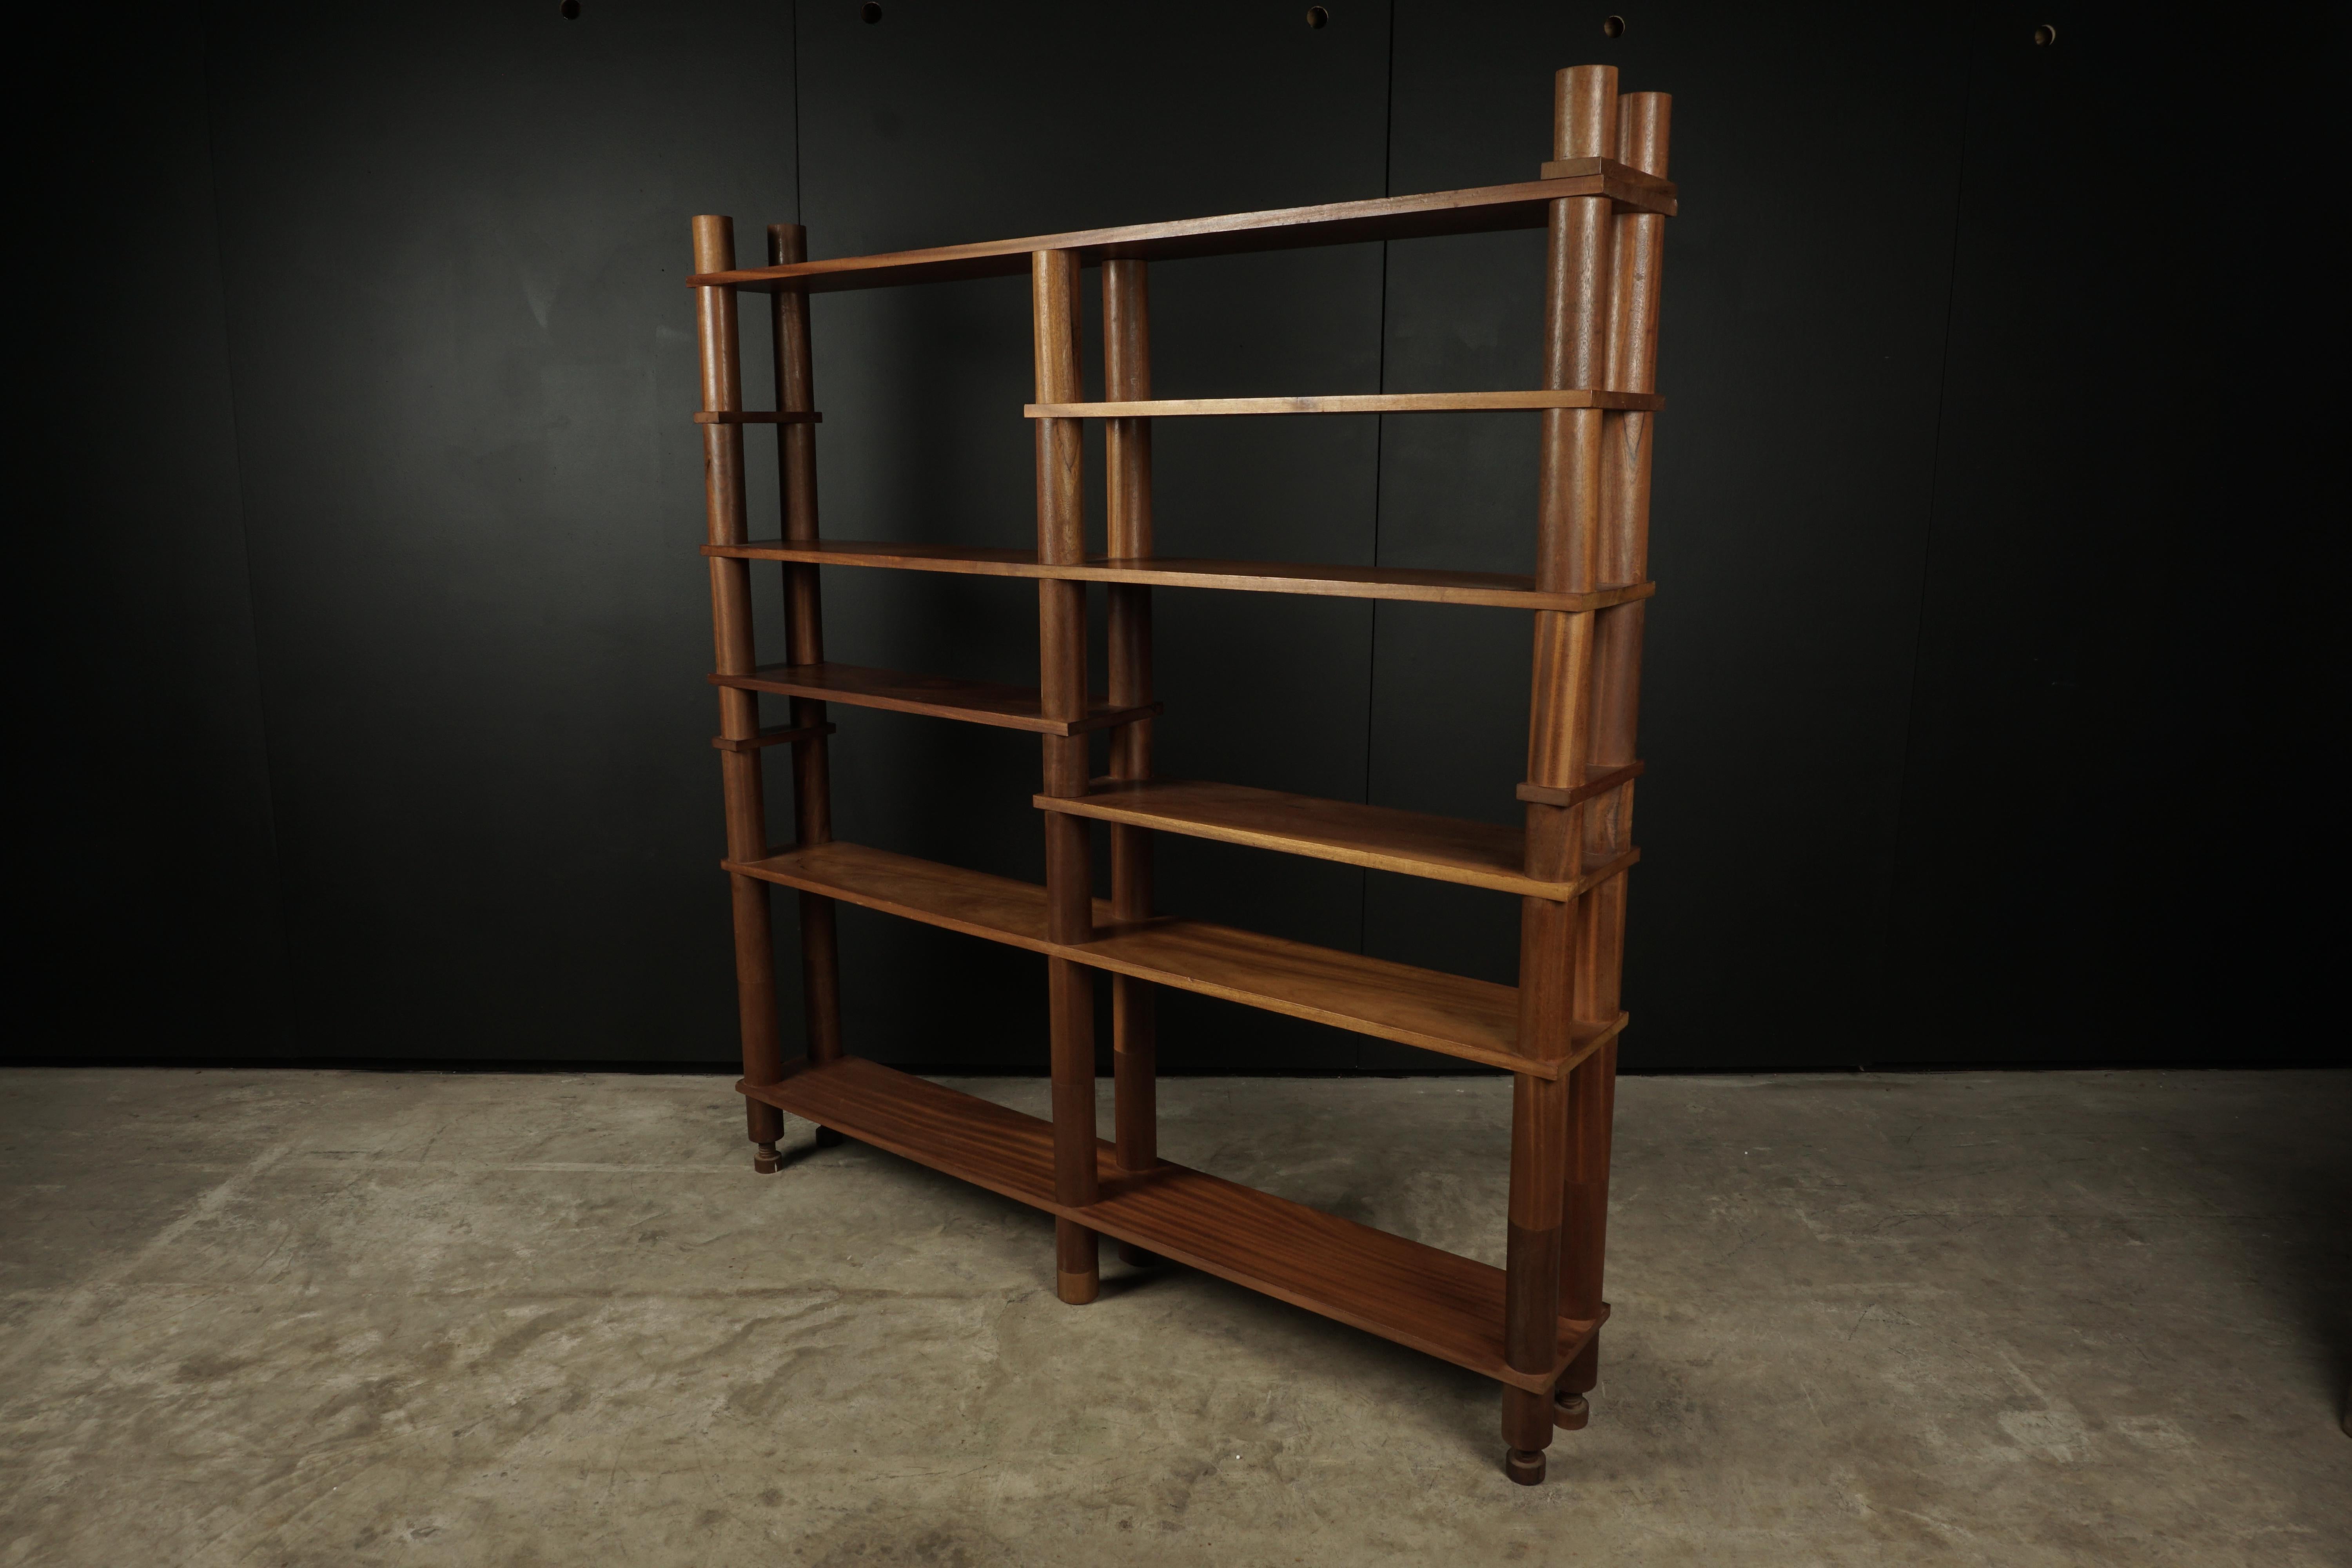 Midcentury freestanding shelf from France, circa 1960. Modular pieces that are changeable to design the shelf to your wishes. Solid teak construction.